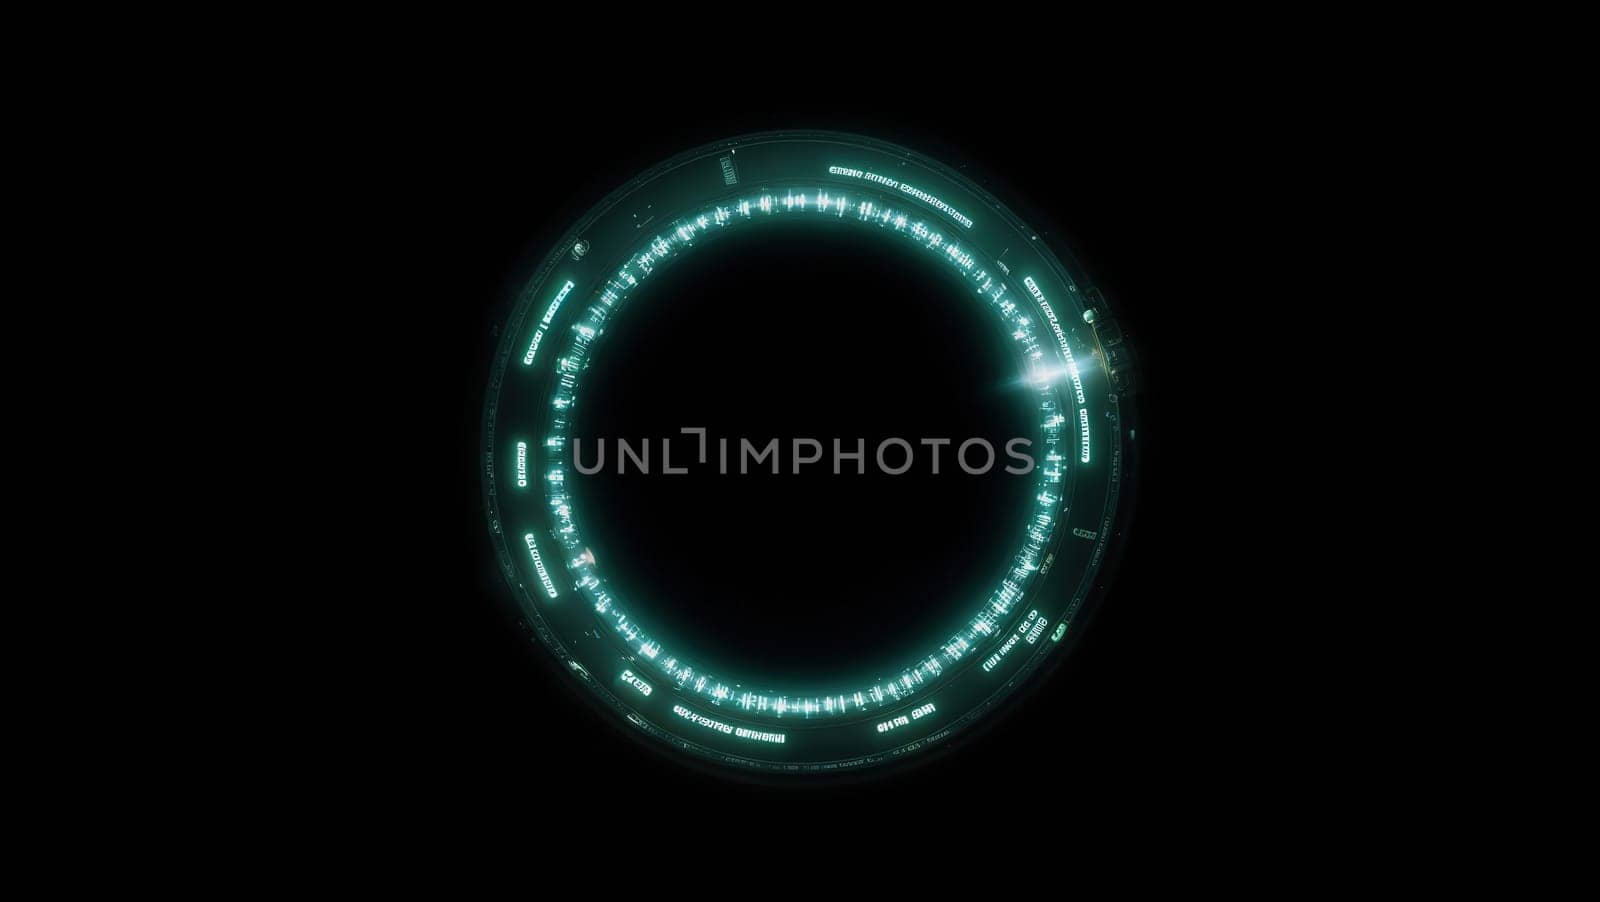 UI futuristic abstract blue circular interface background by macroarting